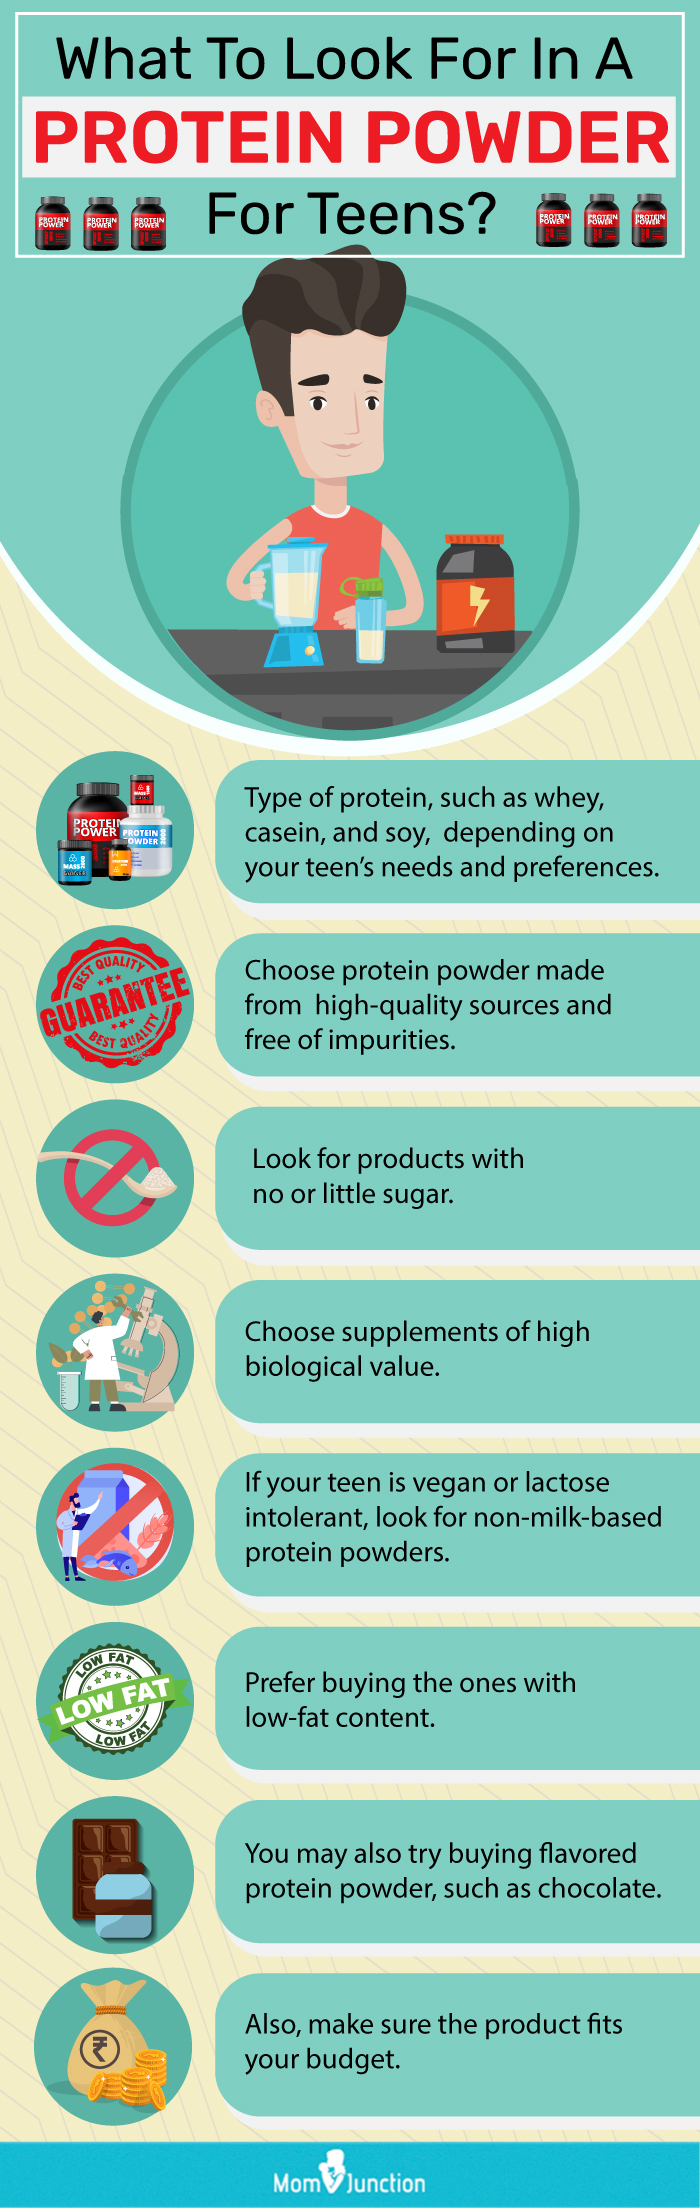 What To Look For In A Protein Powder For Teens?